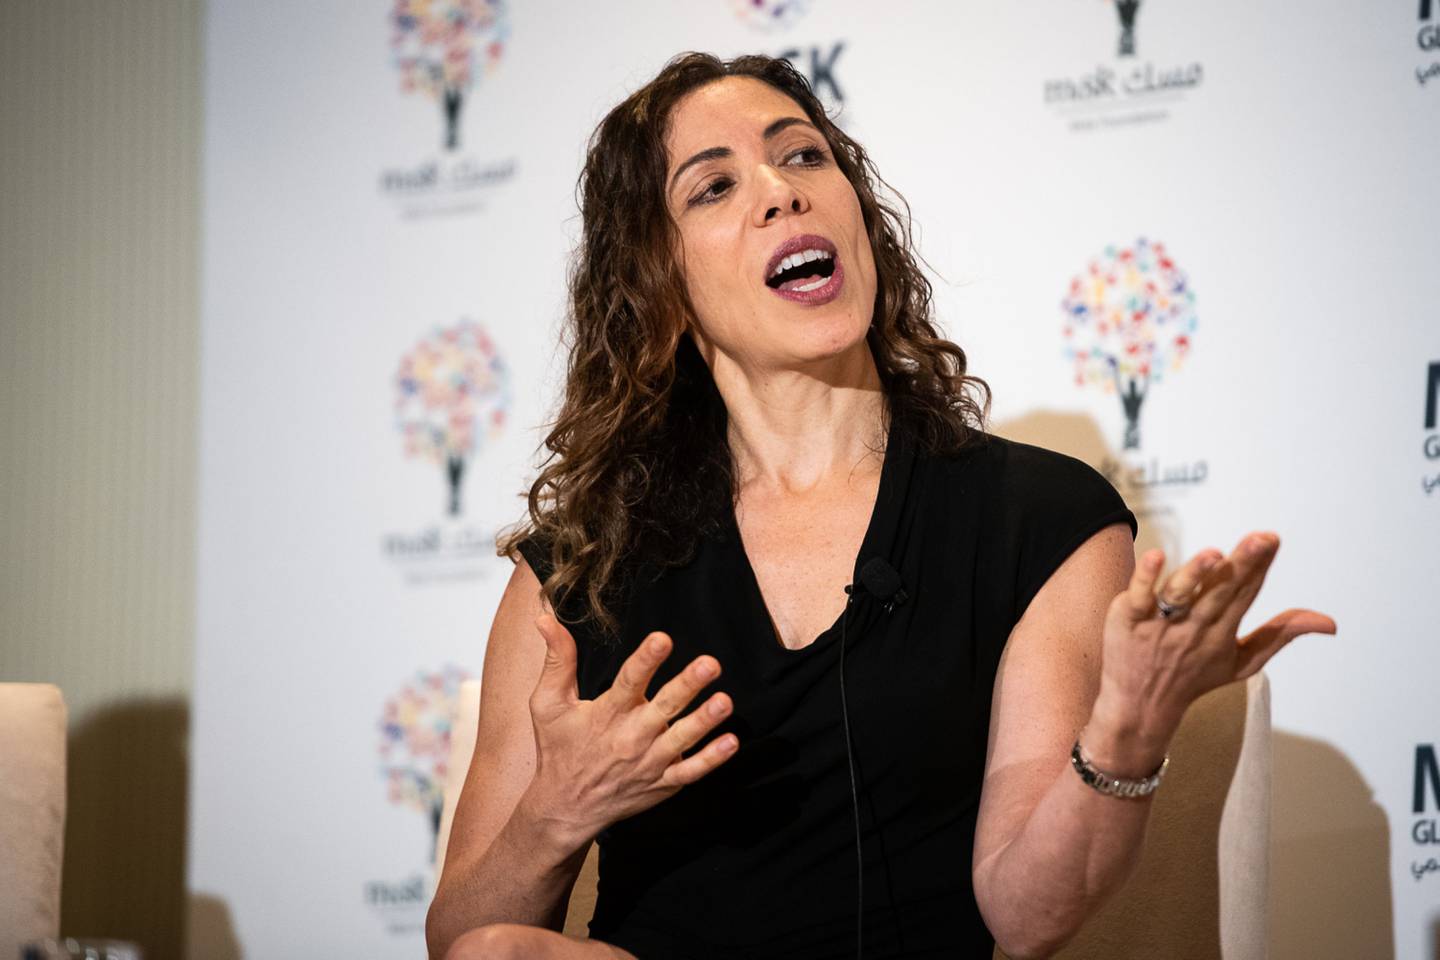 Linda Rottenberg, co-founder and executive director of Endeavor Global